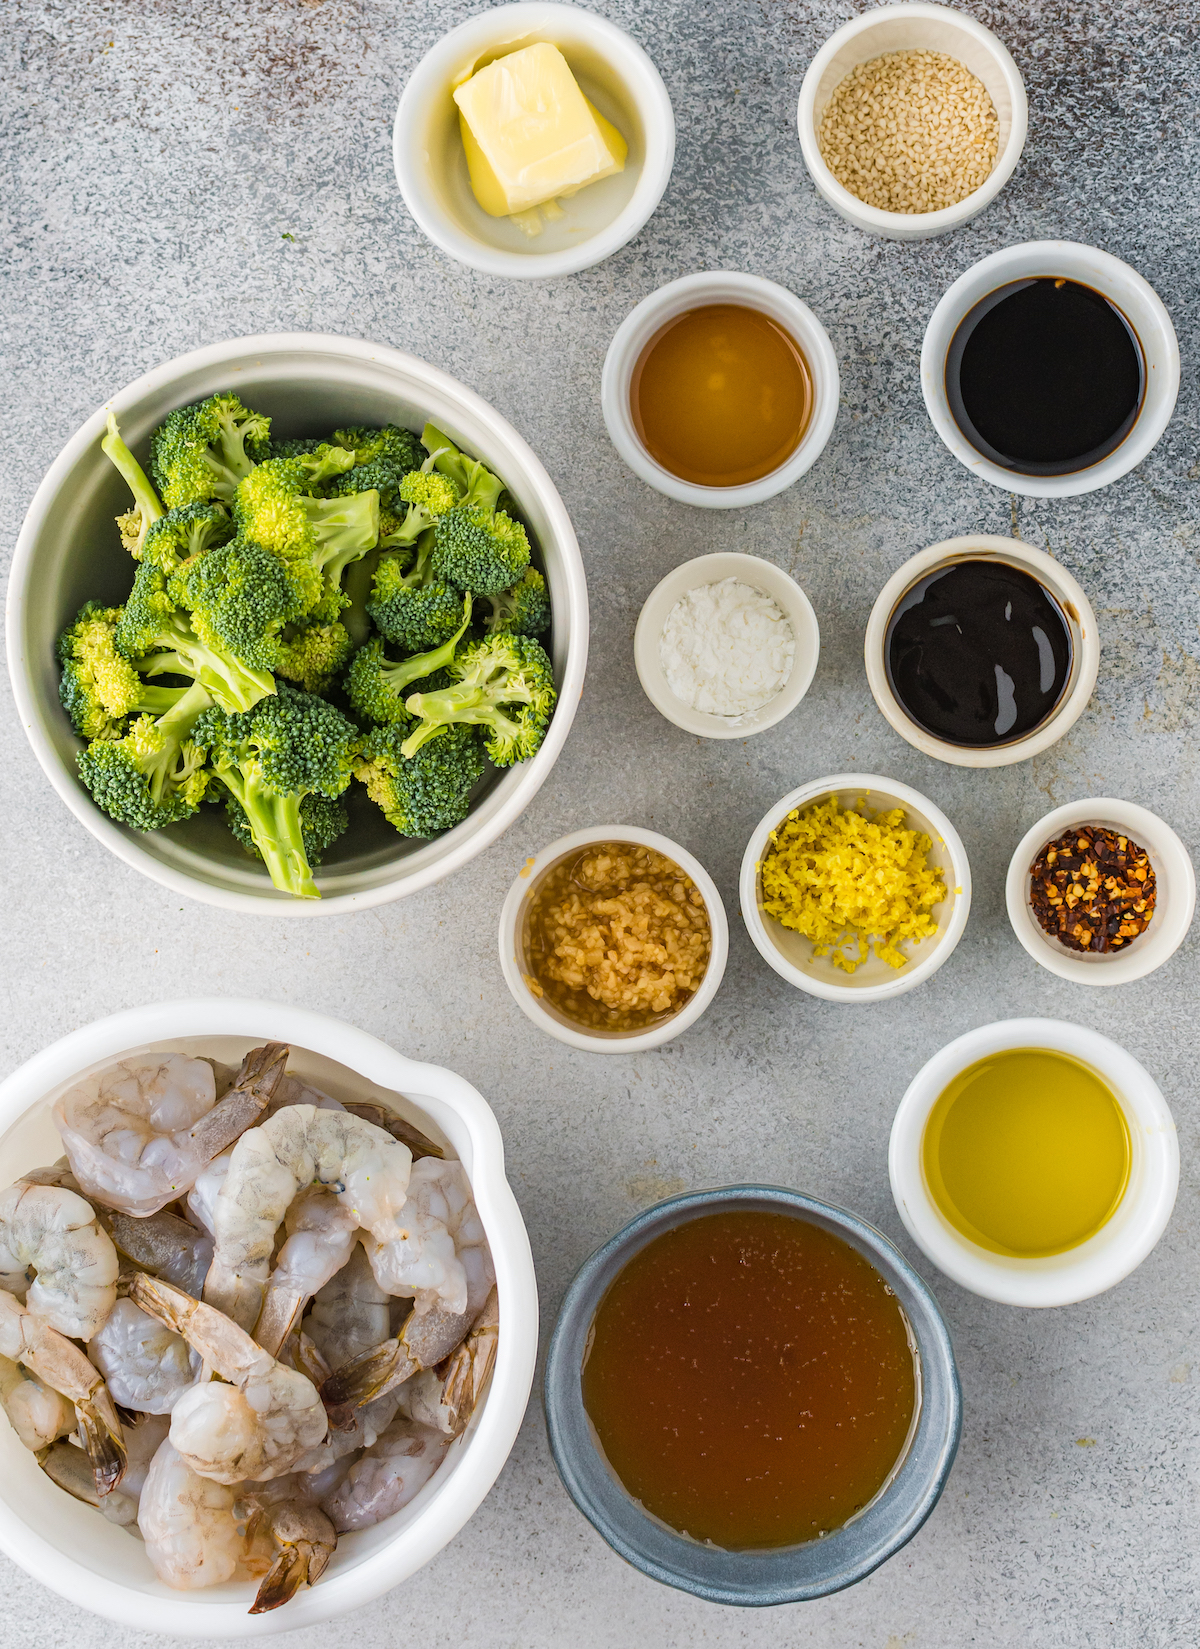 Overhead view of prep dishes that contain all the ingredients for shrimp and broccoli.